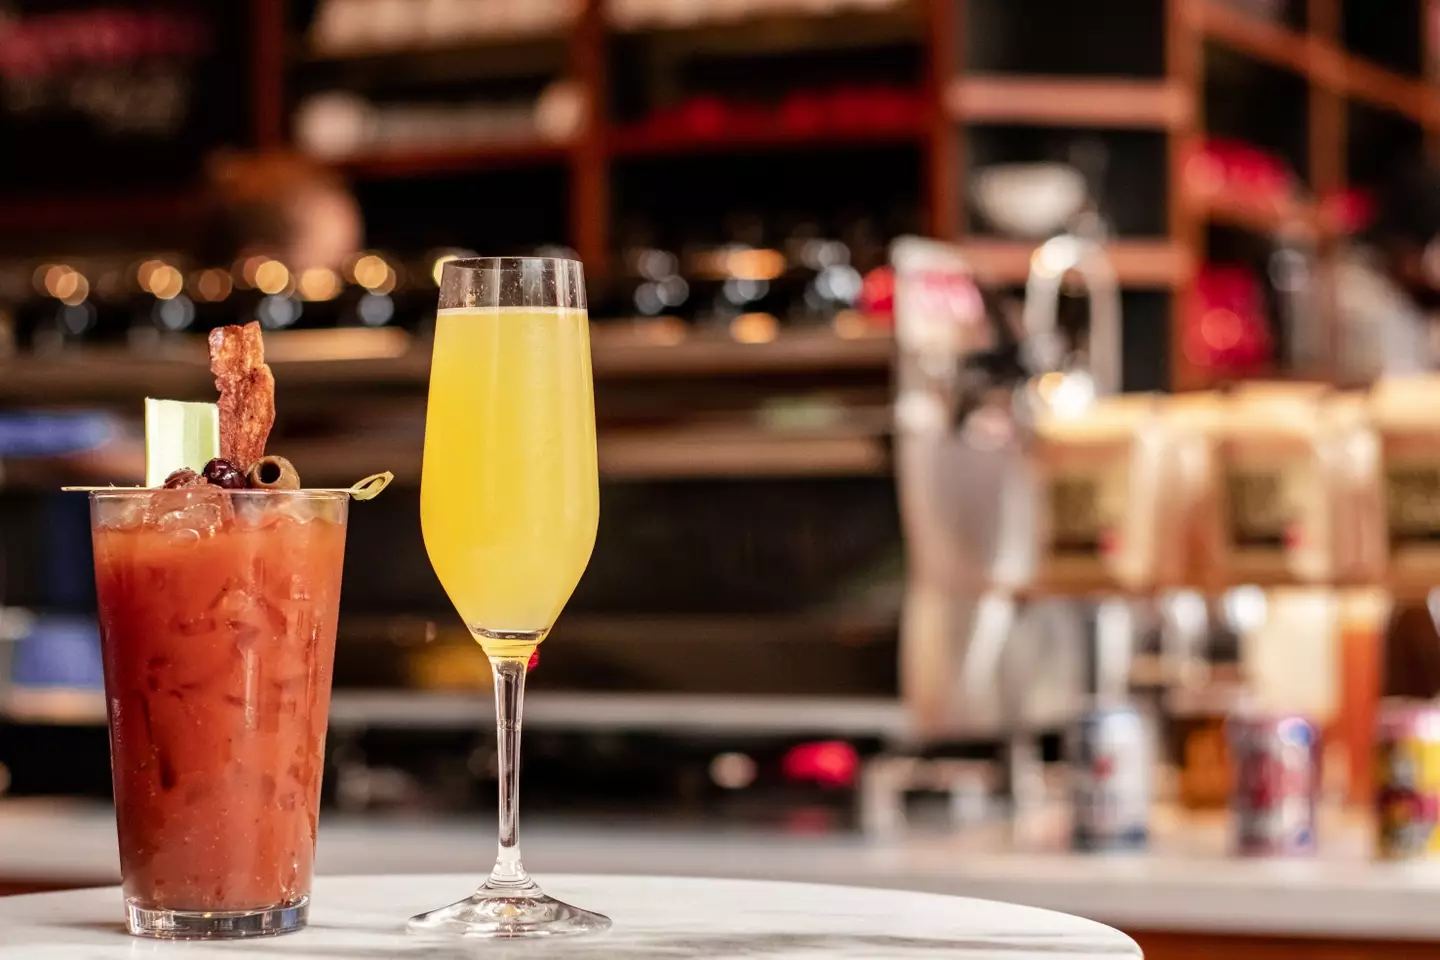 You'll be sampling all kinds of brunches.